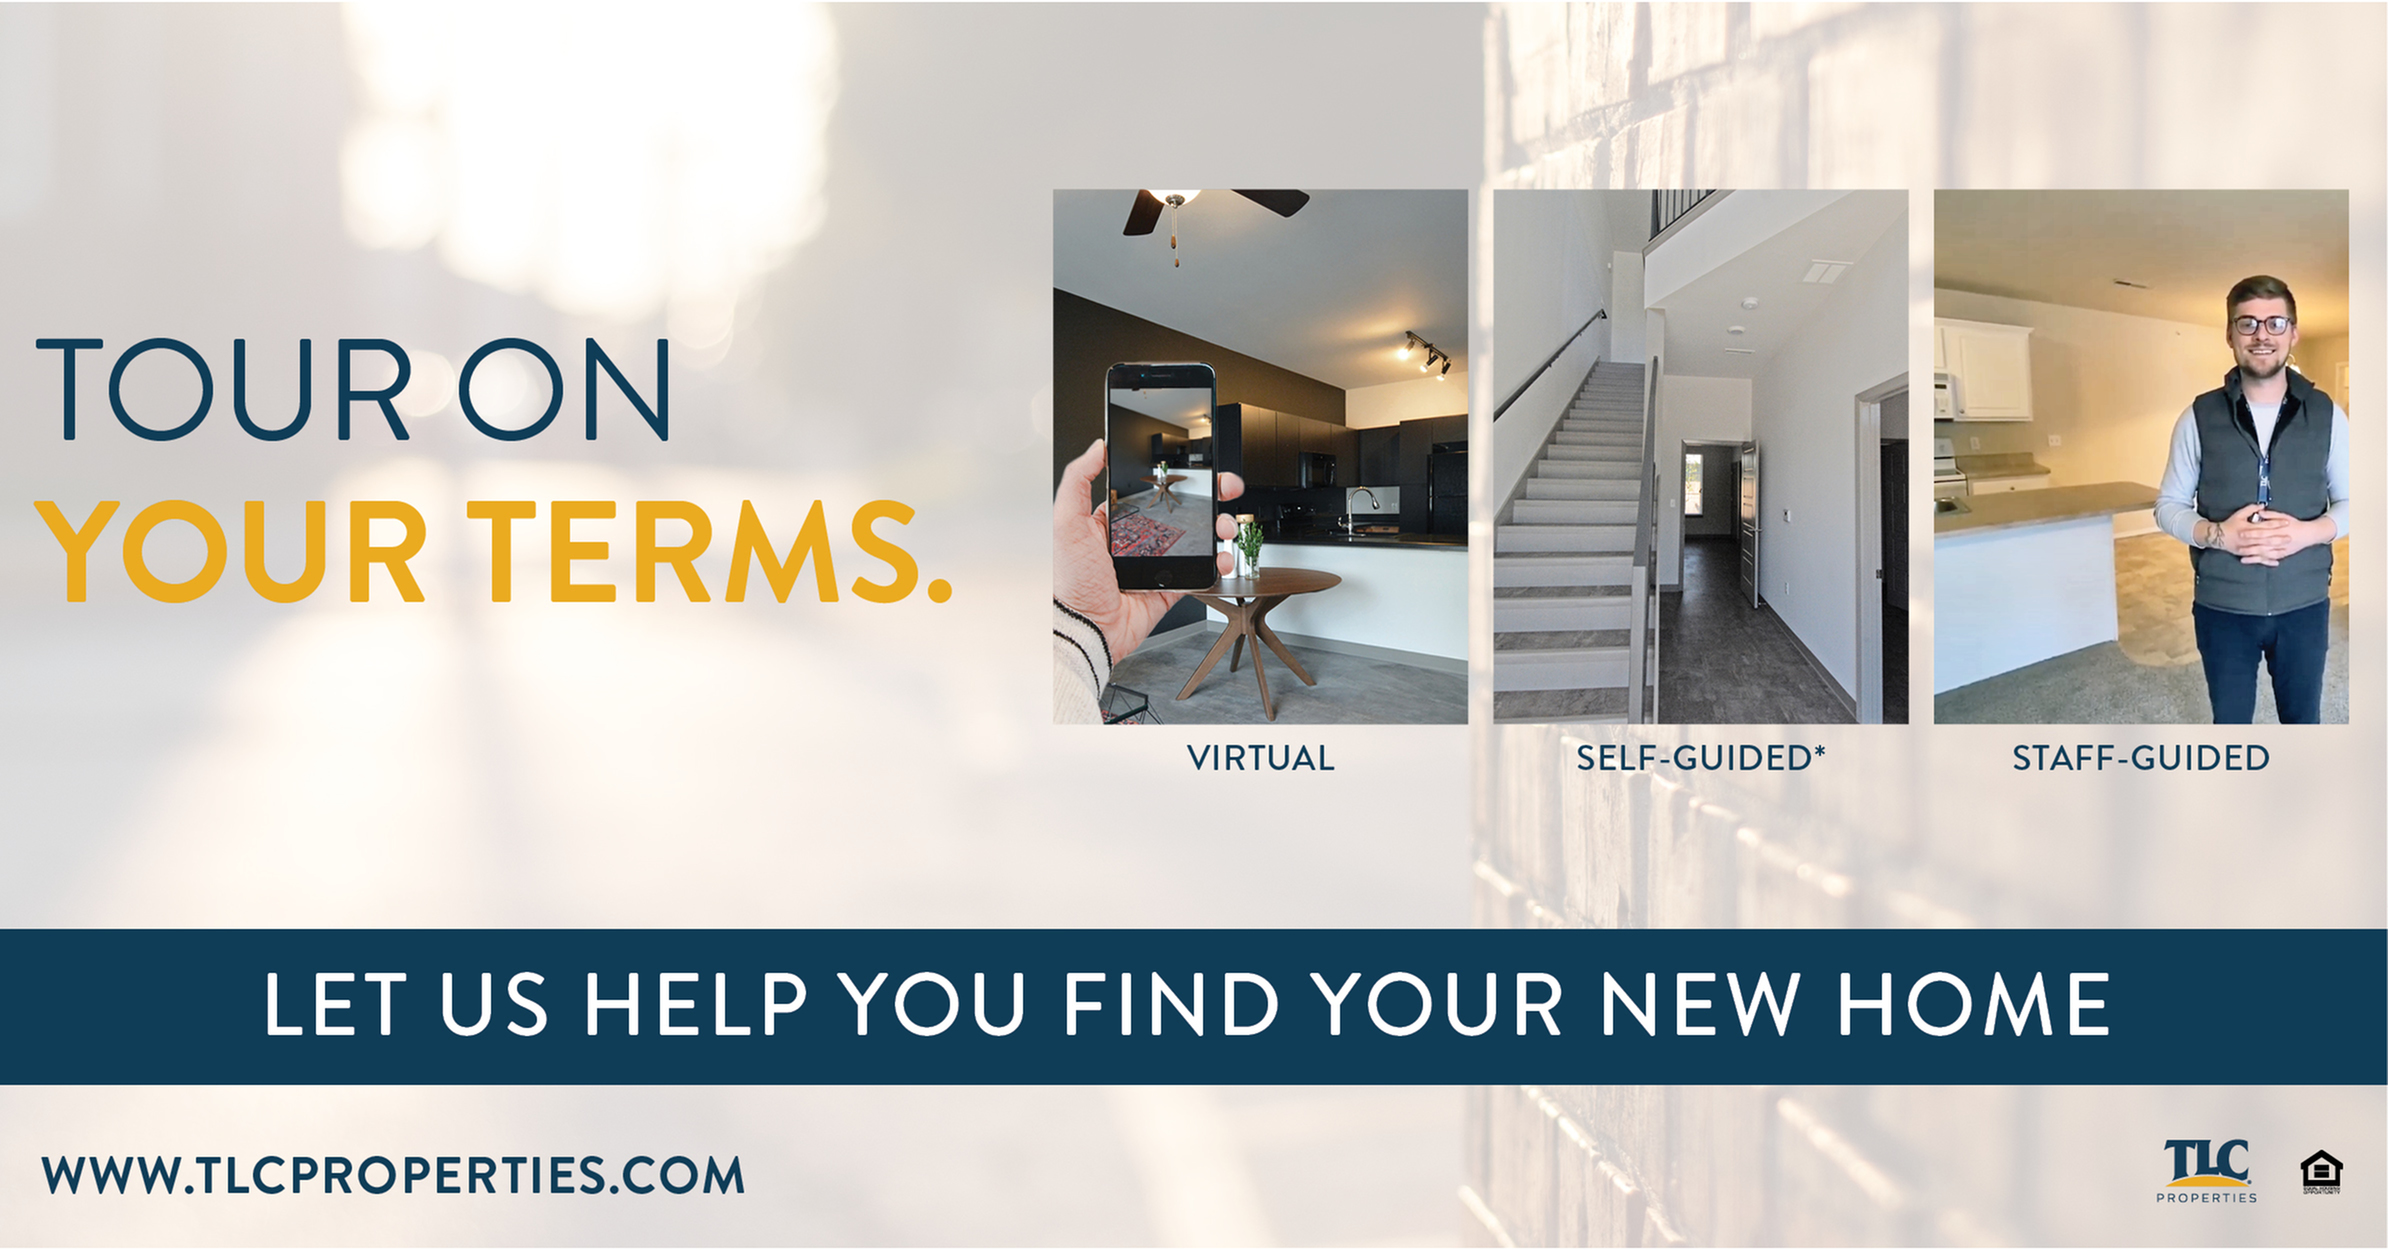 TLC Properties offers three ways to tour your apartment:Self Guided, Staff-guided, and Virtual